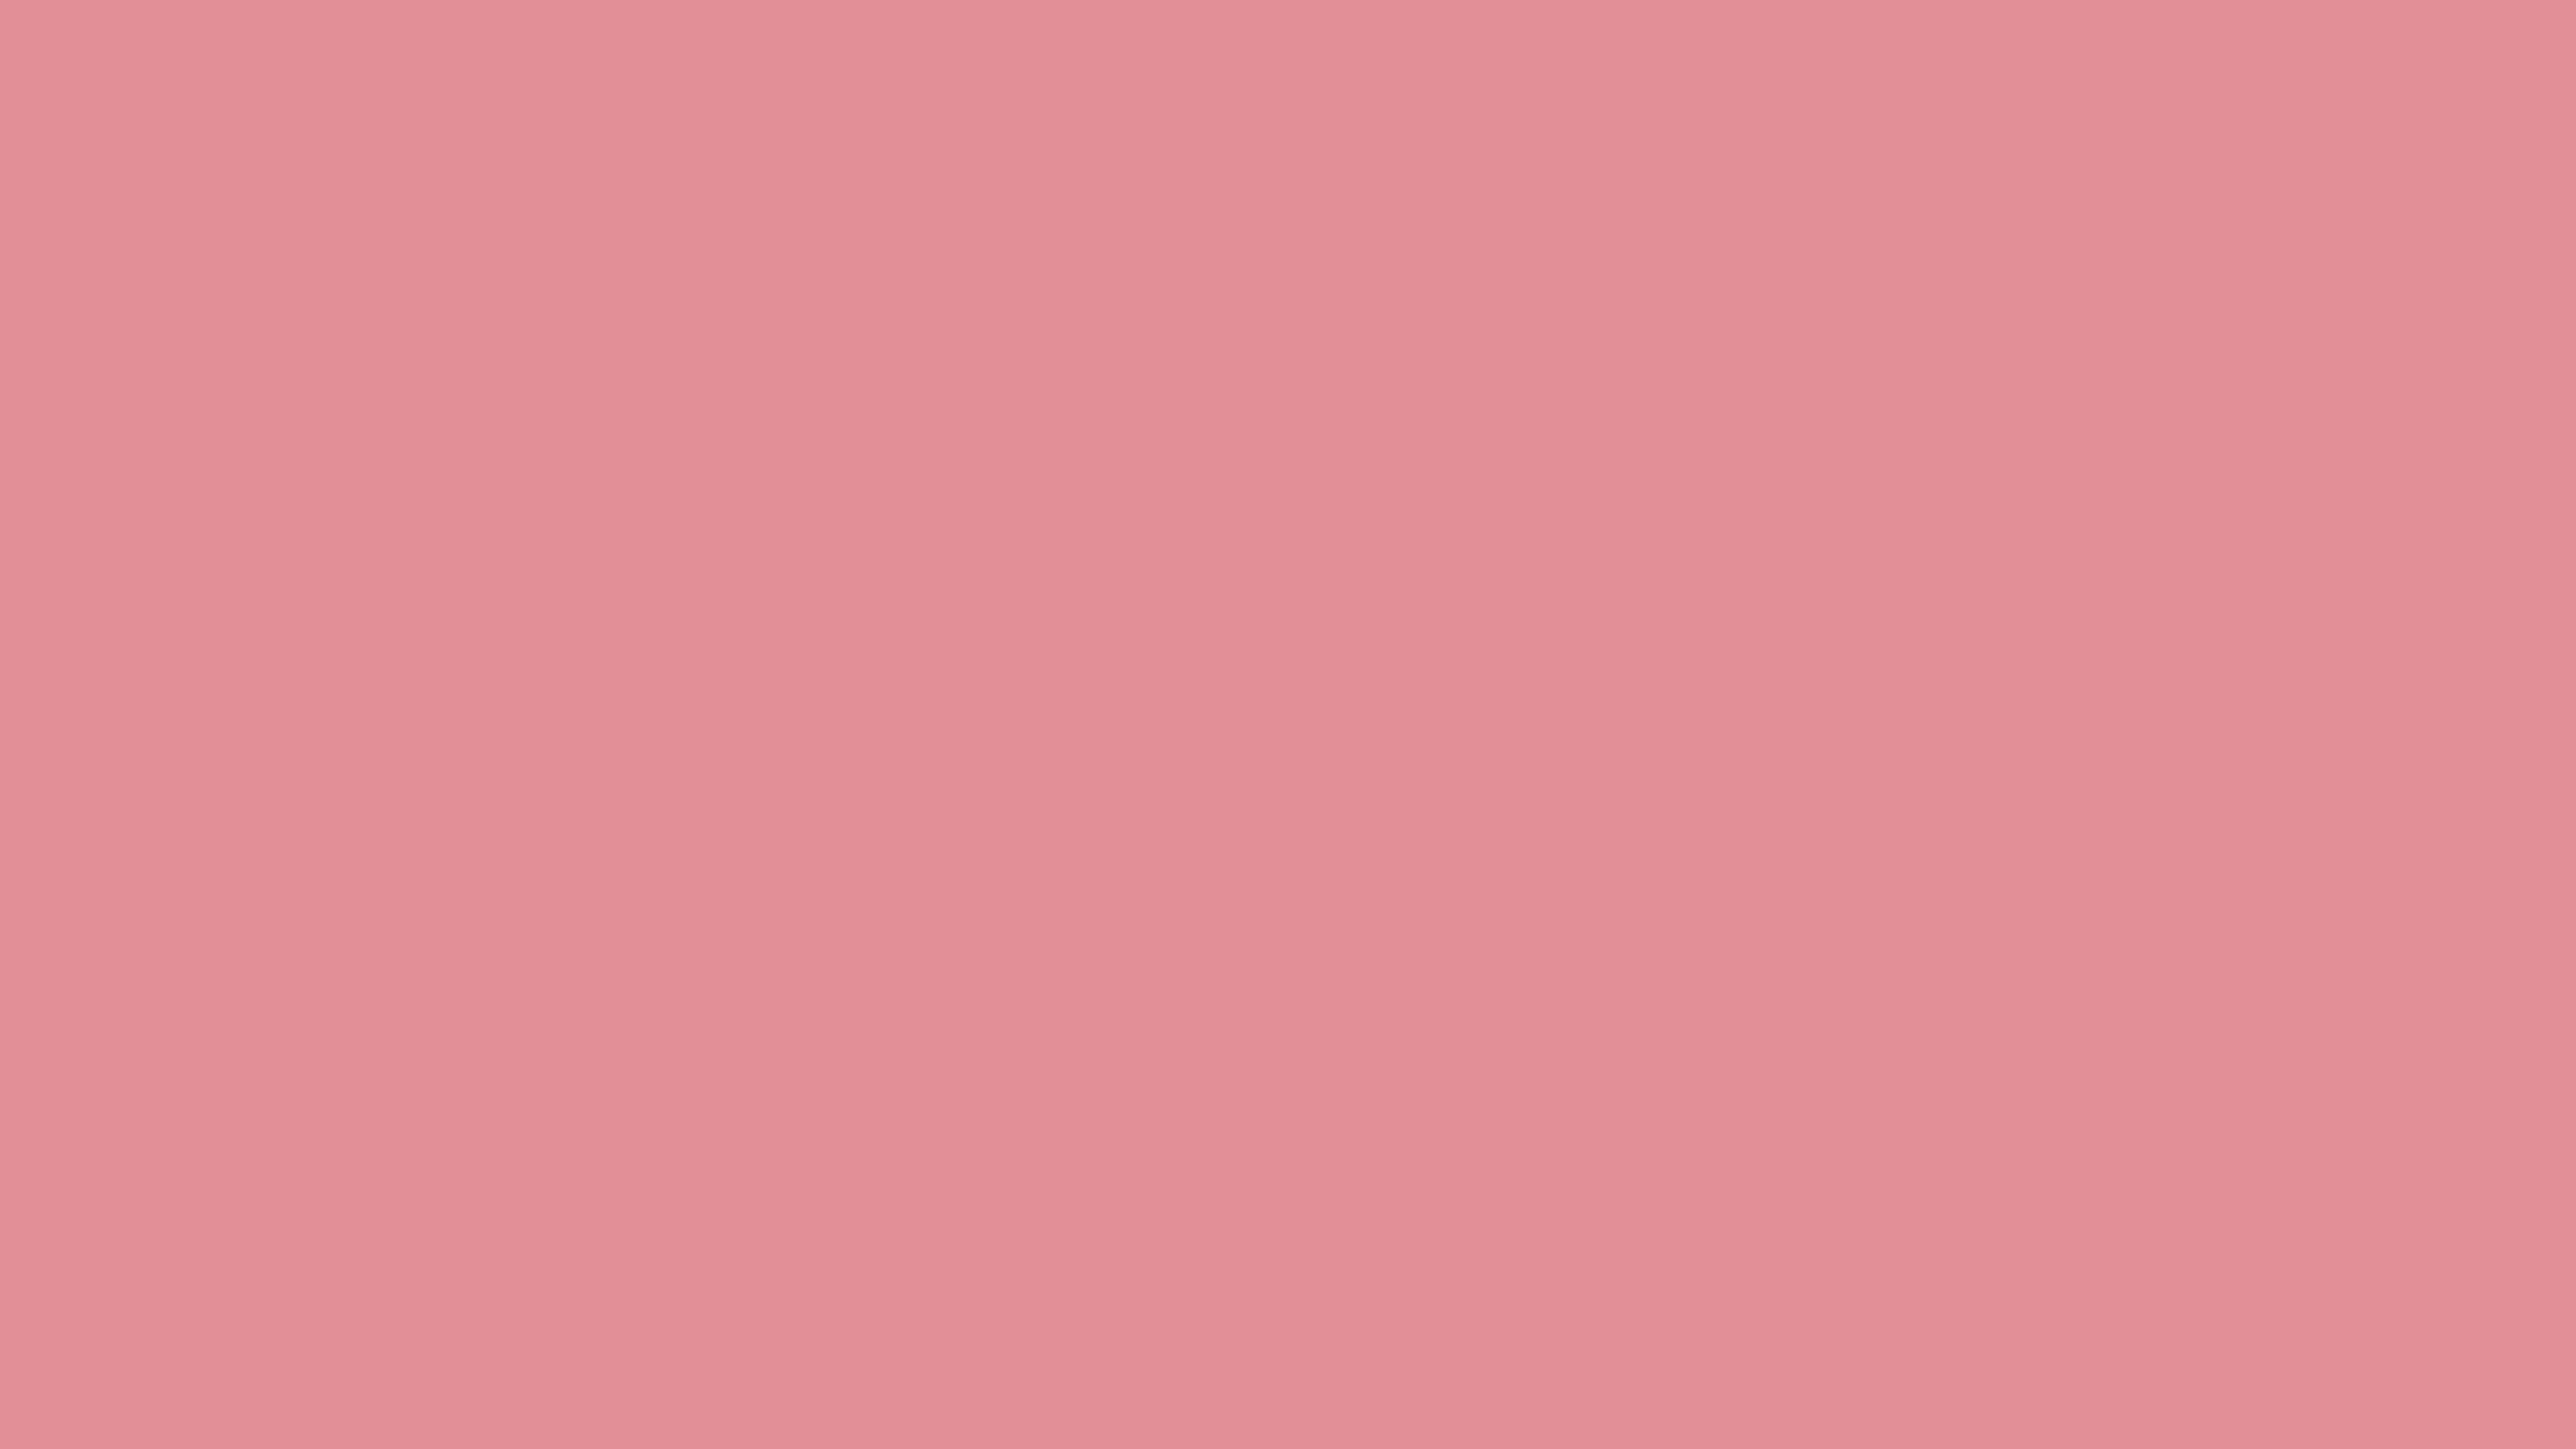 5120x2880 Ruddy Pink Solid Color Background